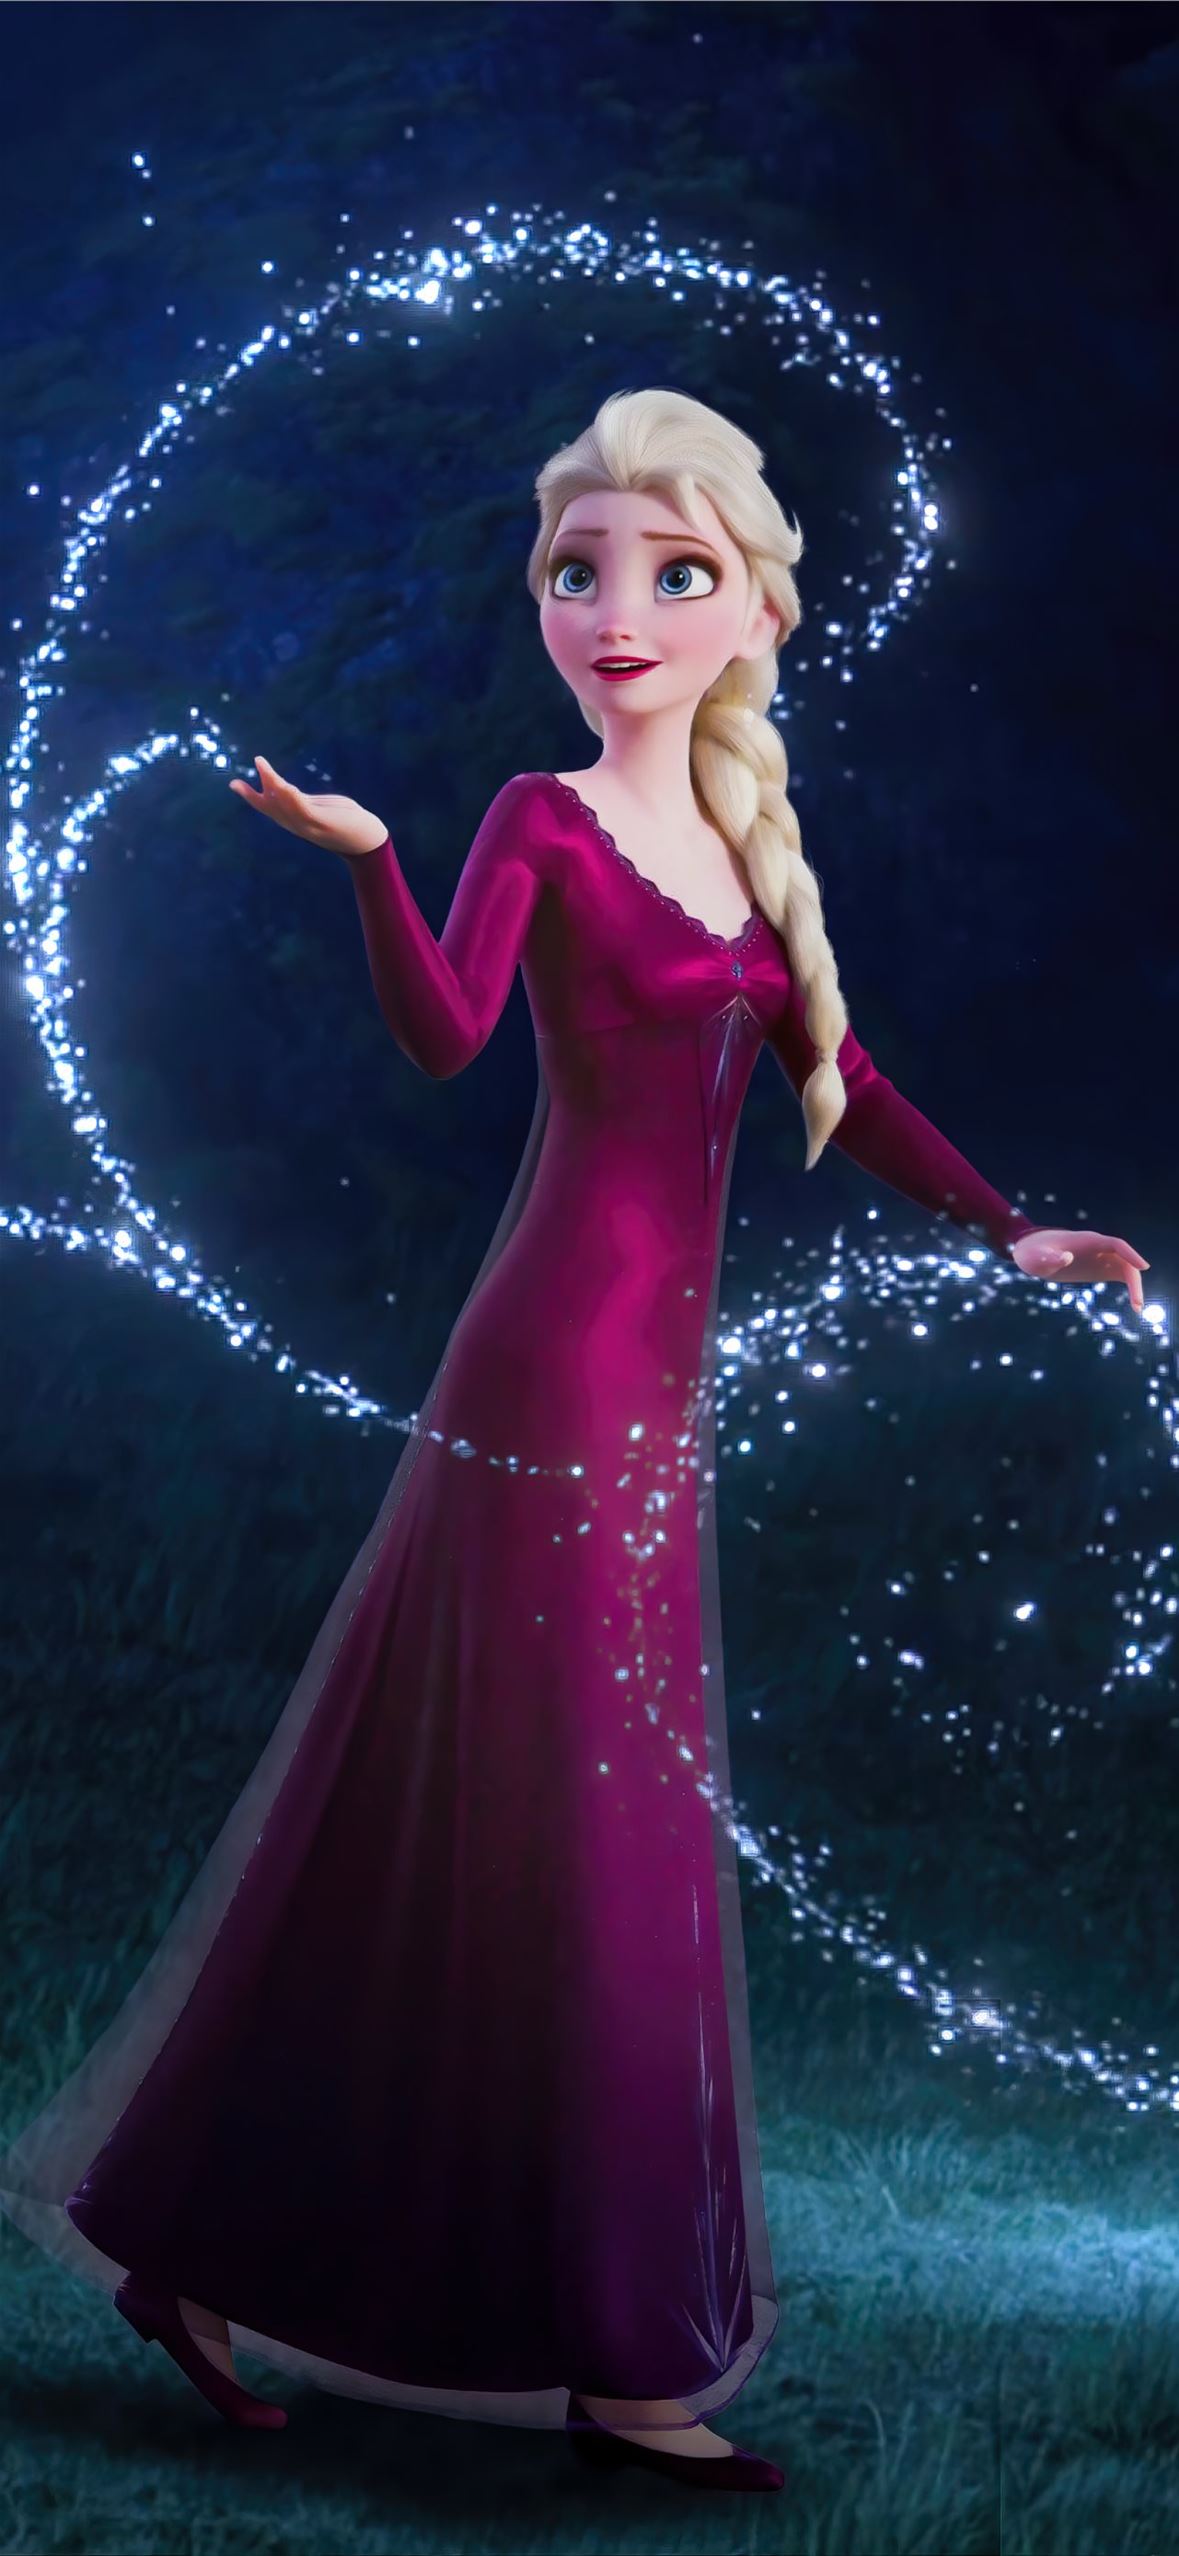 Download Anna Frozen wallpapers for mobile phone free Anna Frozen  HD pictures